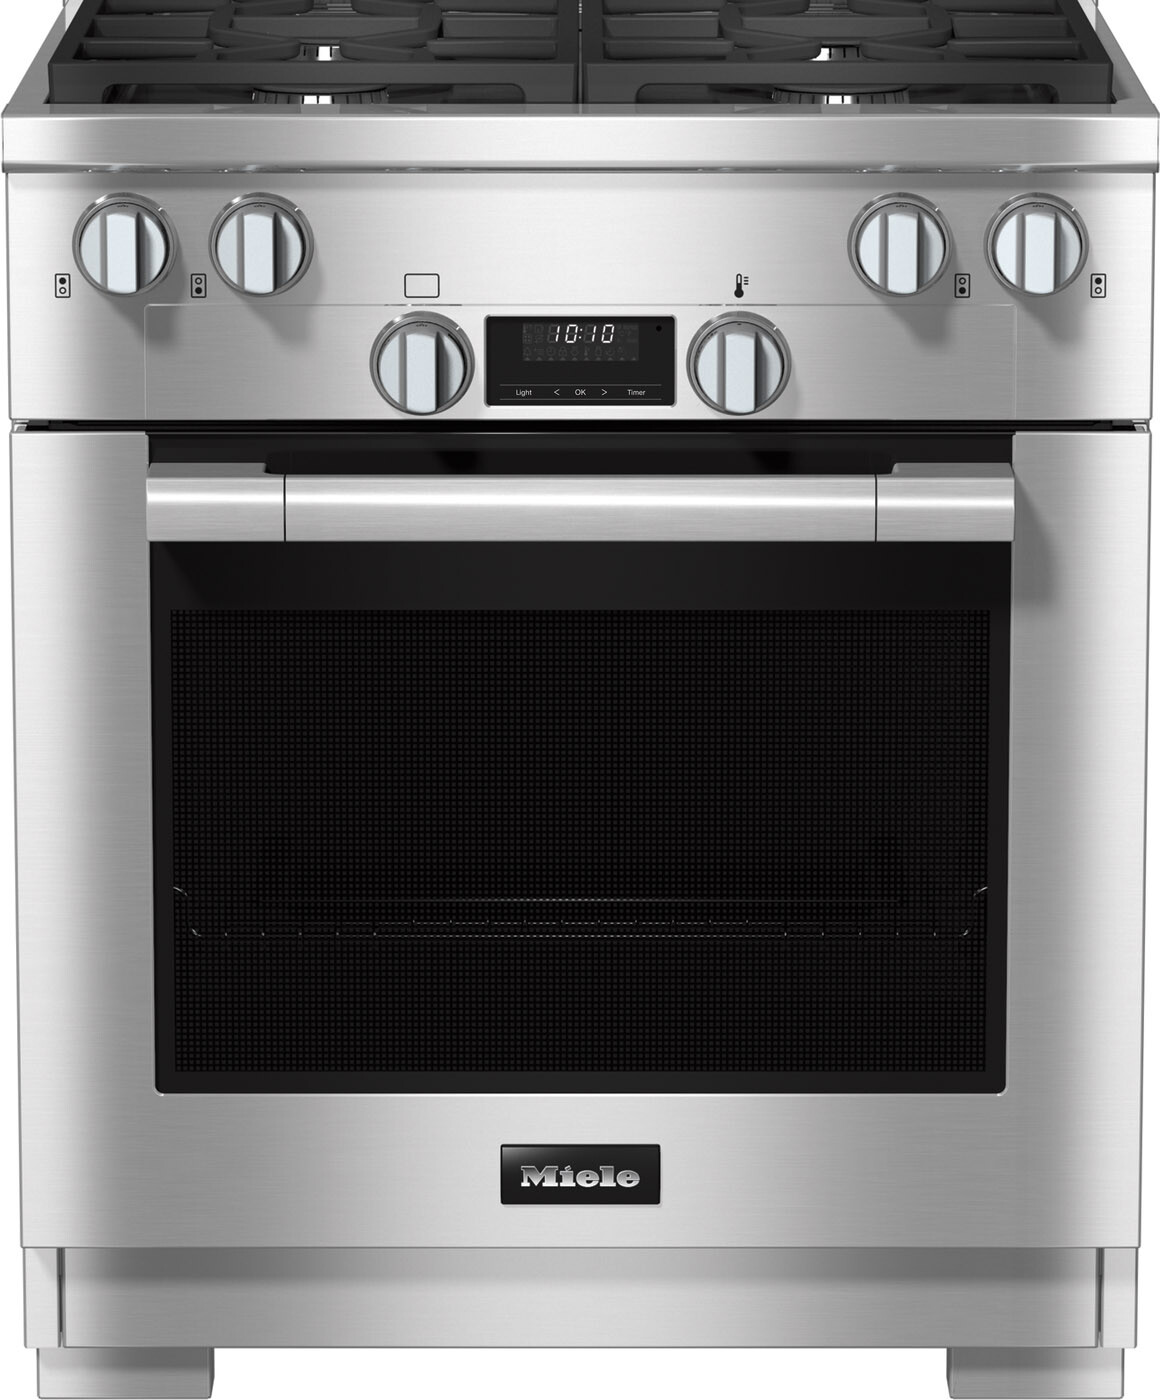 Miele 7000 Series 30 Freestanding Dual Fuel Natural Gas Range HR17243GDFCTS